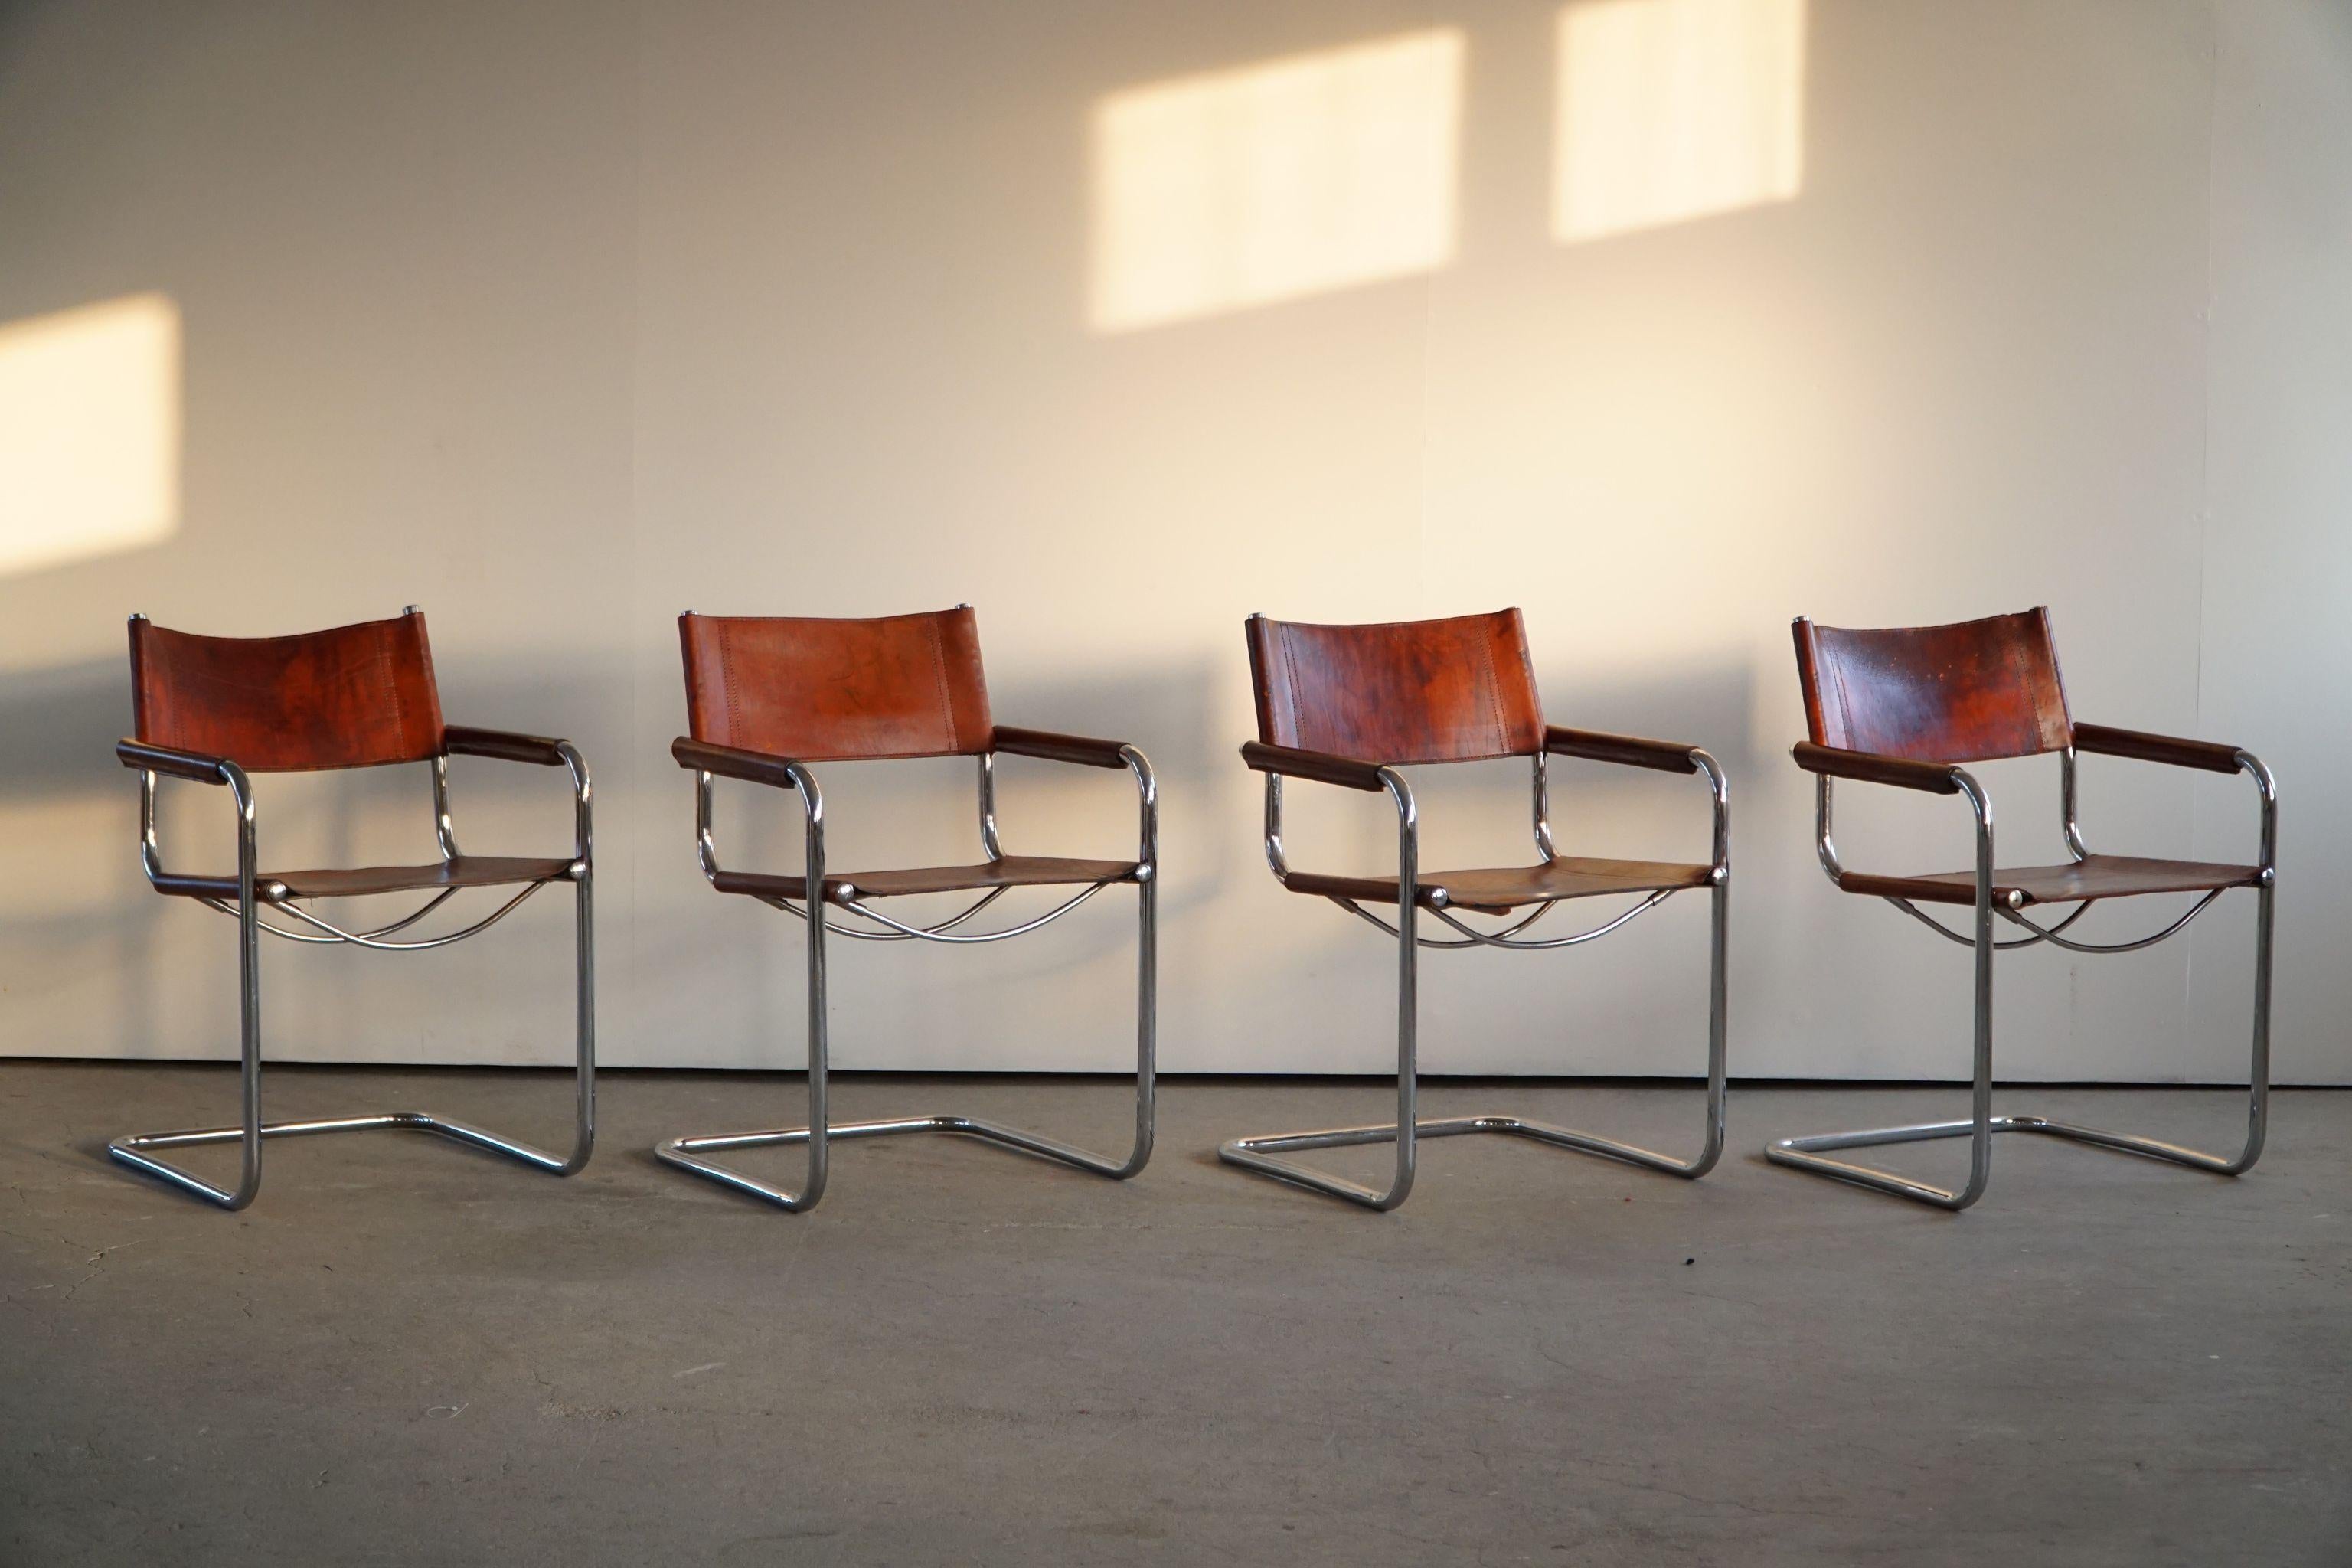 Art Deco Set of 4 Vintage Cantilever Armchairs in Cognac Leather by Linea Veam, Italy 70s